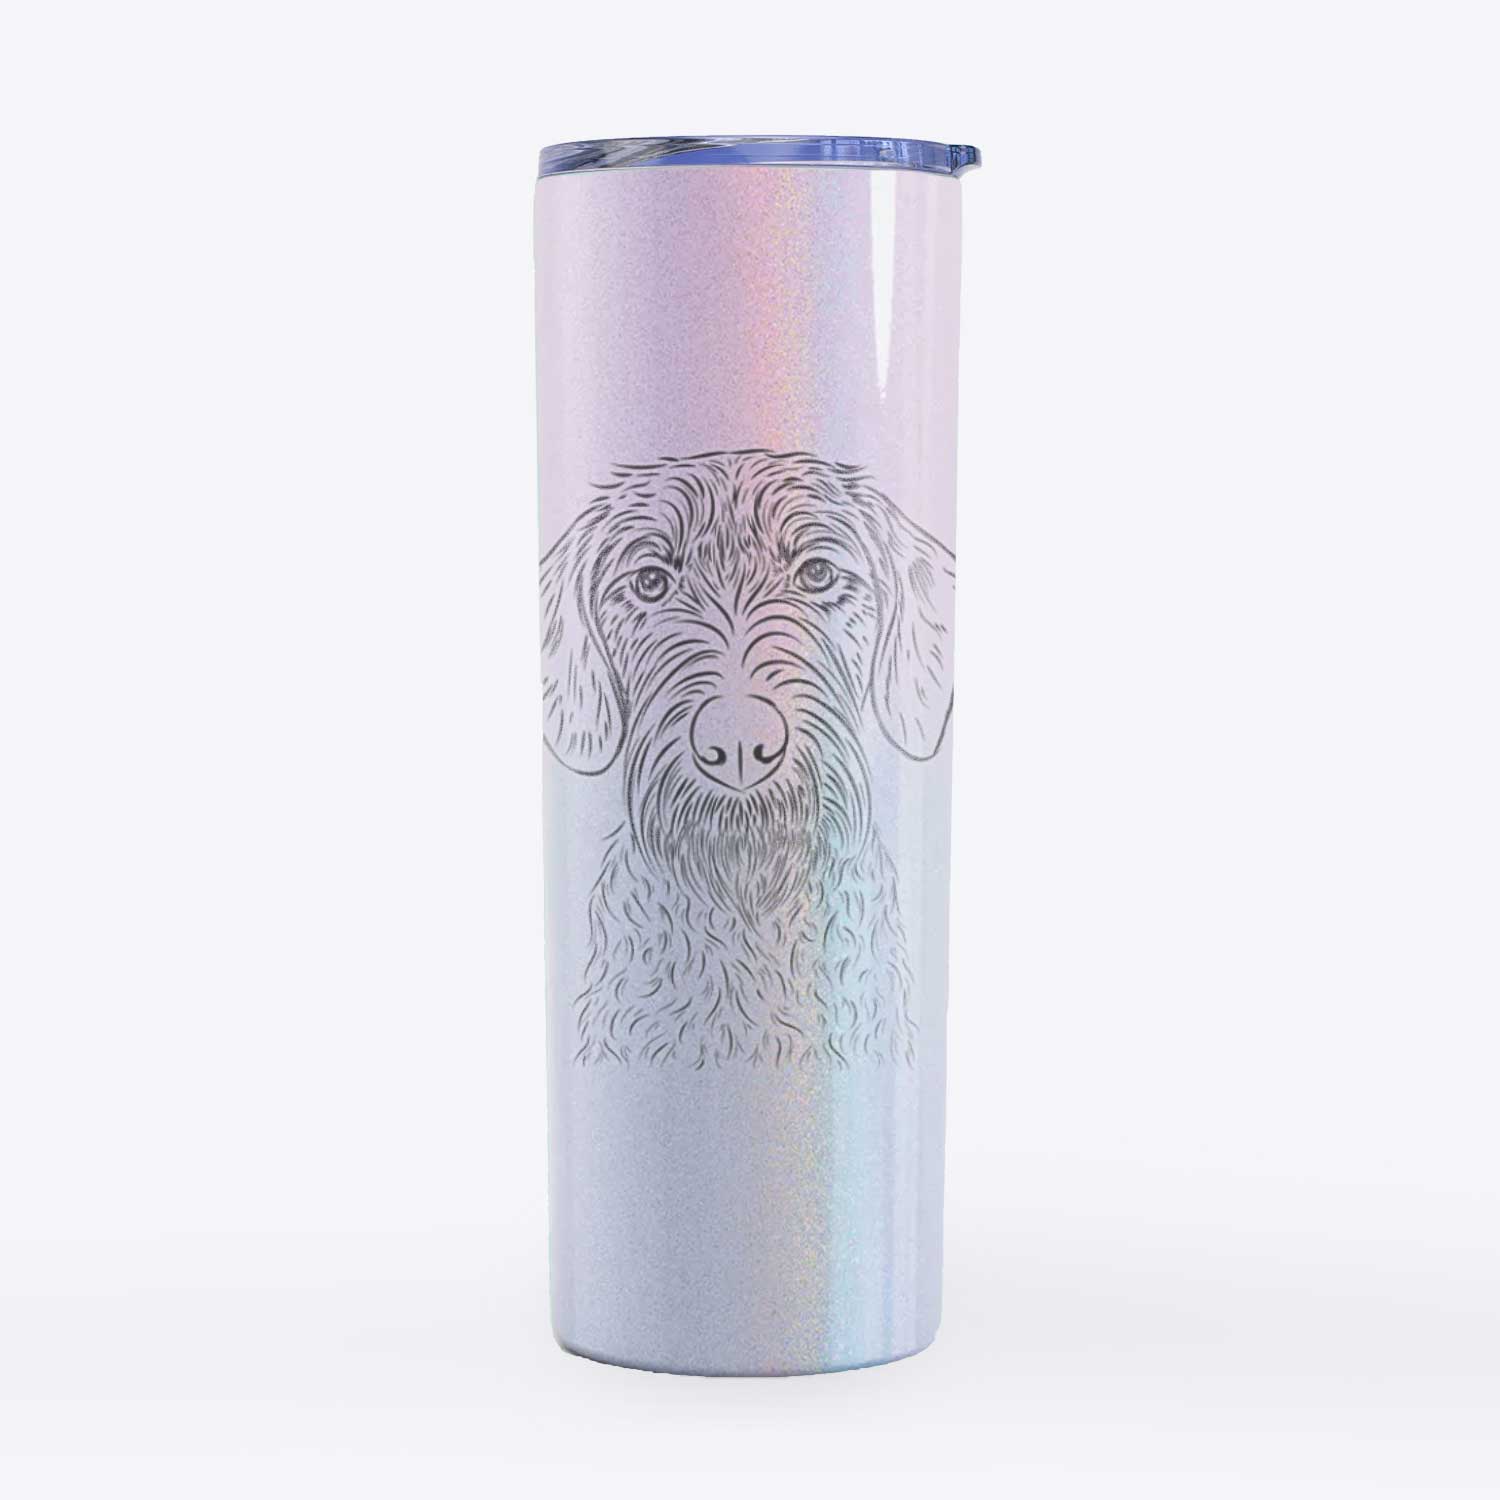 Gus the German Wirehaired Pointer - 20oz Skinny Tumbler